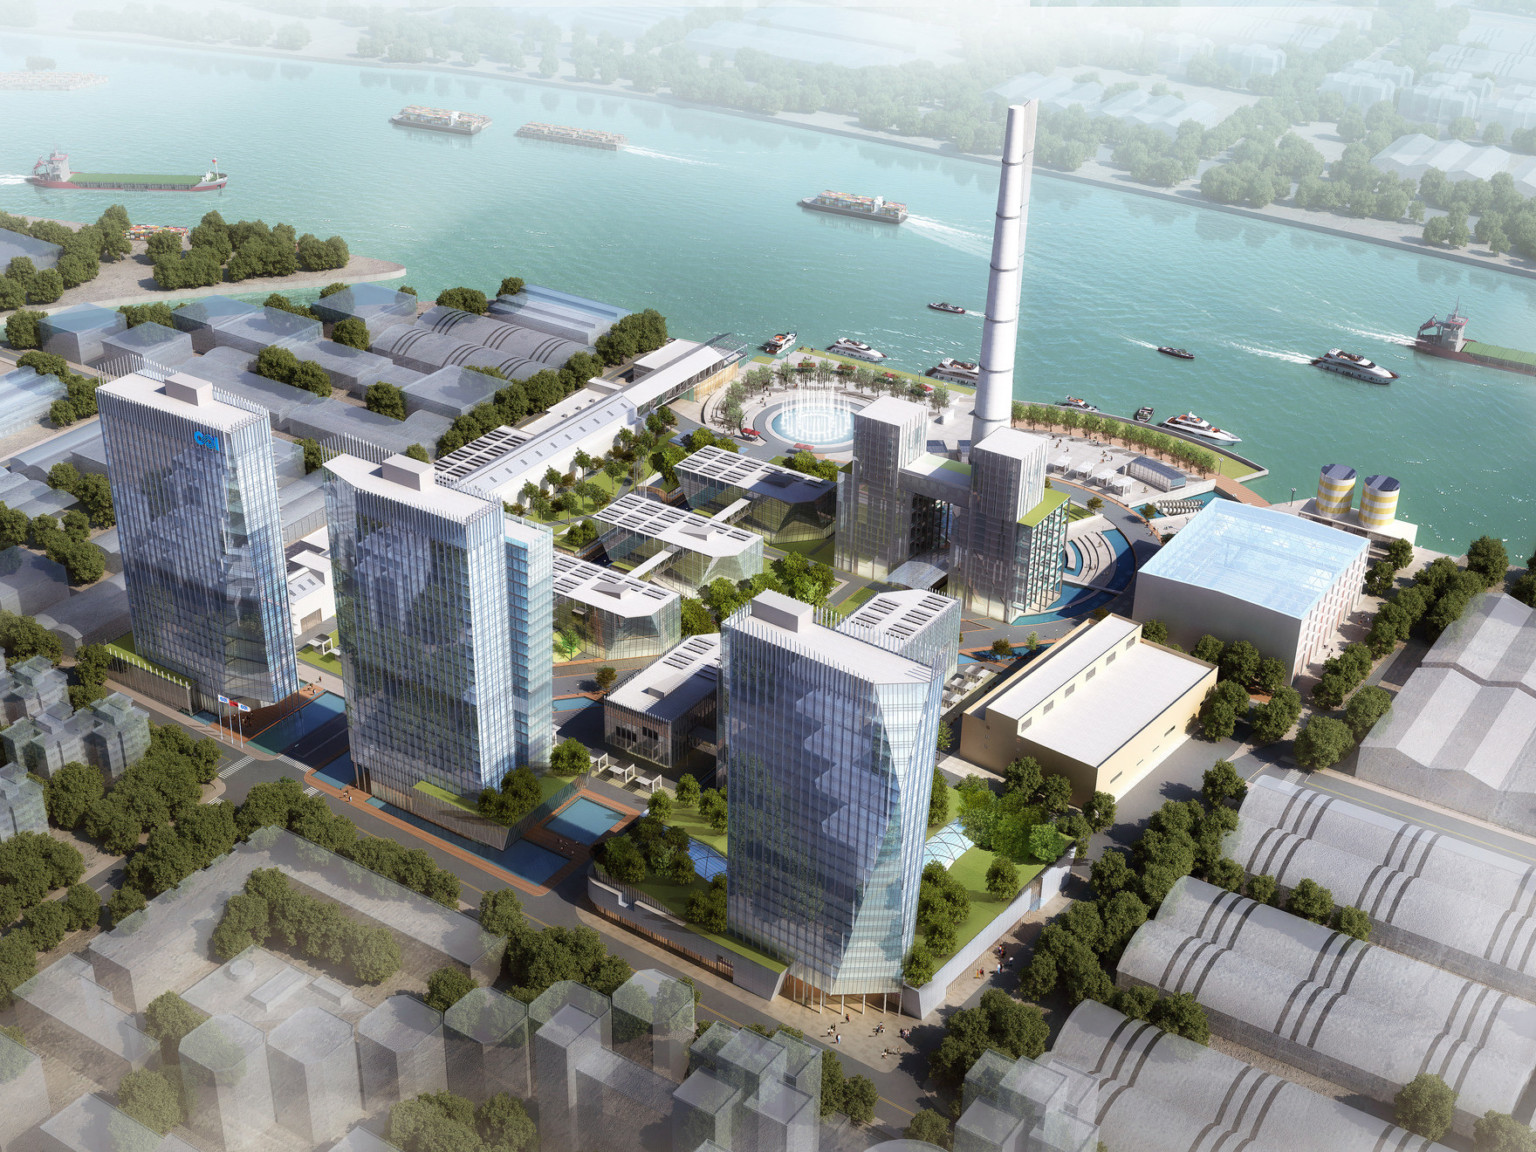 power plant redesign with mixed-use buildings and pedestrian areas looking out to boats on the Huangpu River